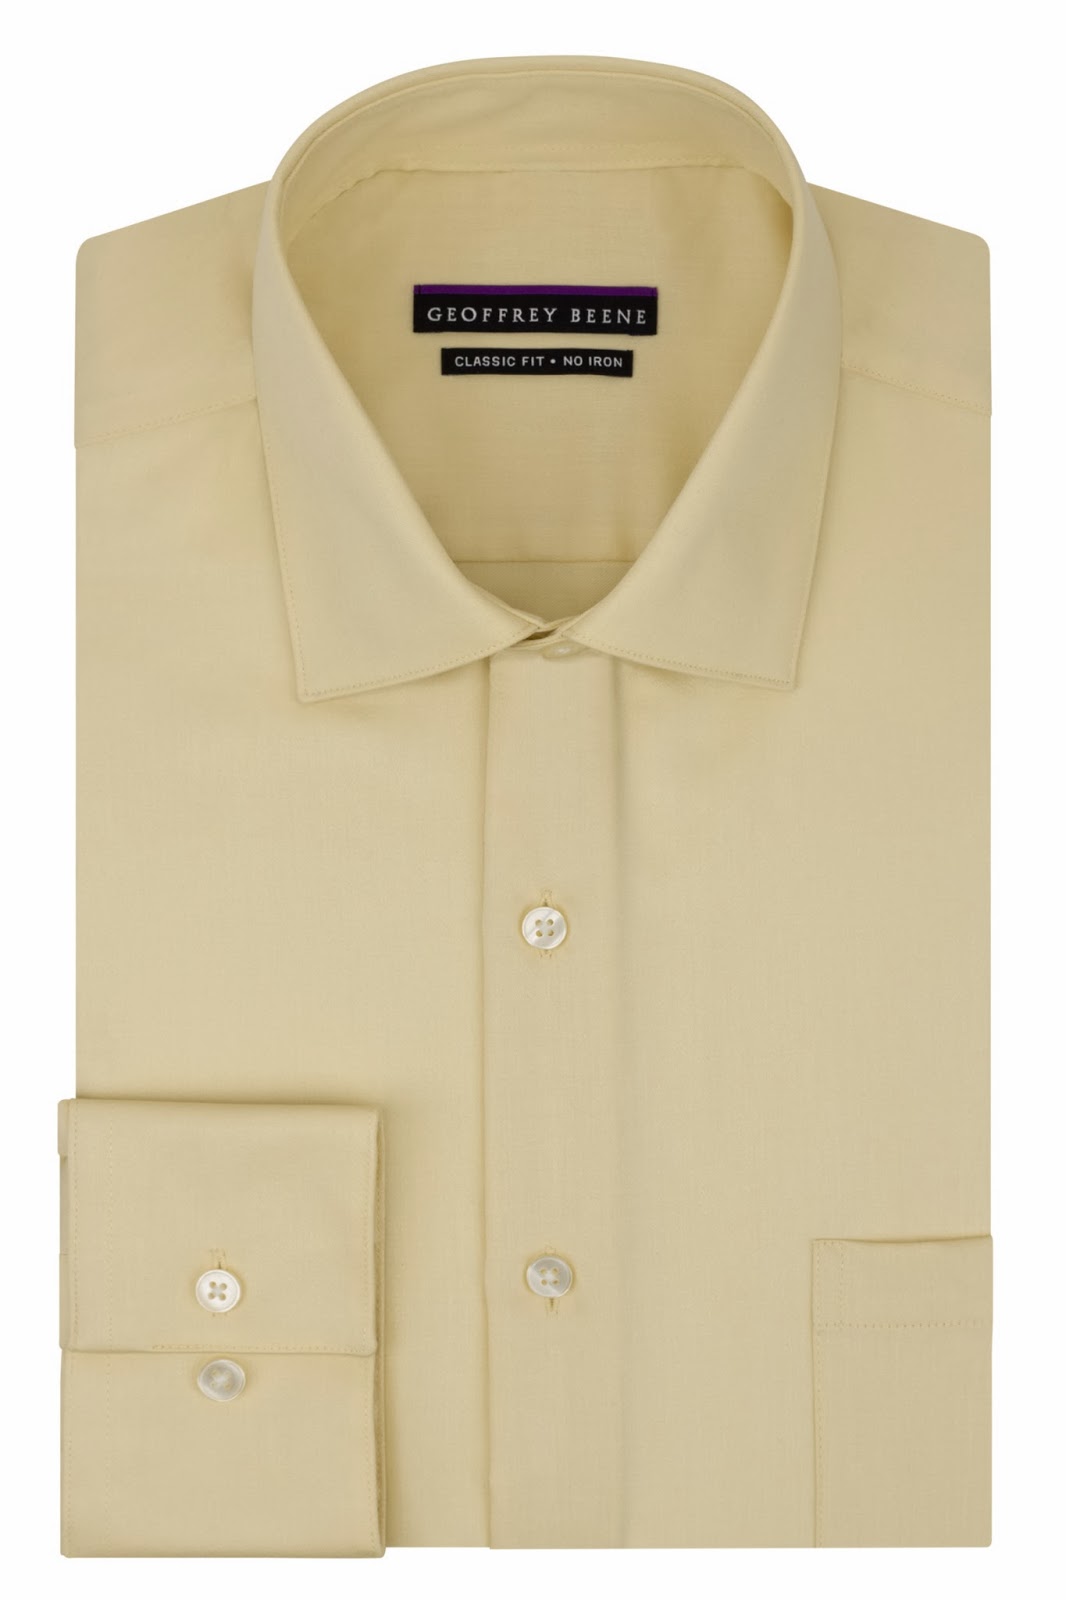 The Dandy Fashion: GEOFFREY BEENE® RE-LAUNCHES ICONIC DRESS SHIRT ...